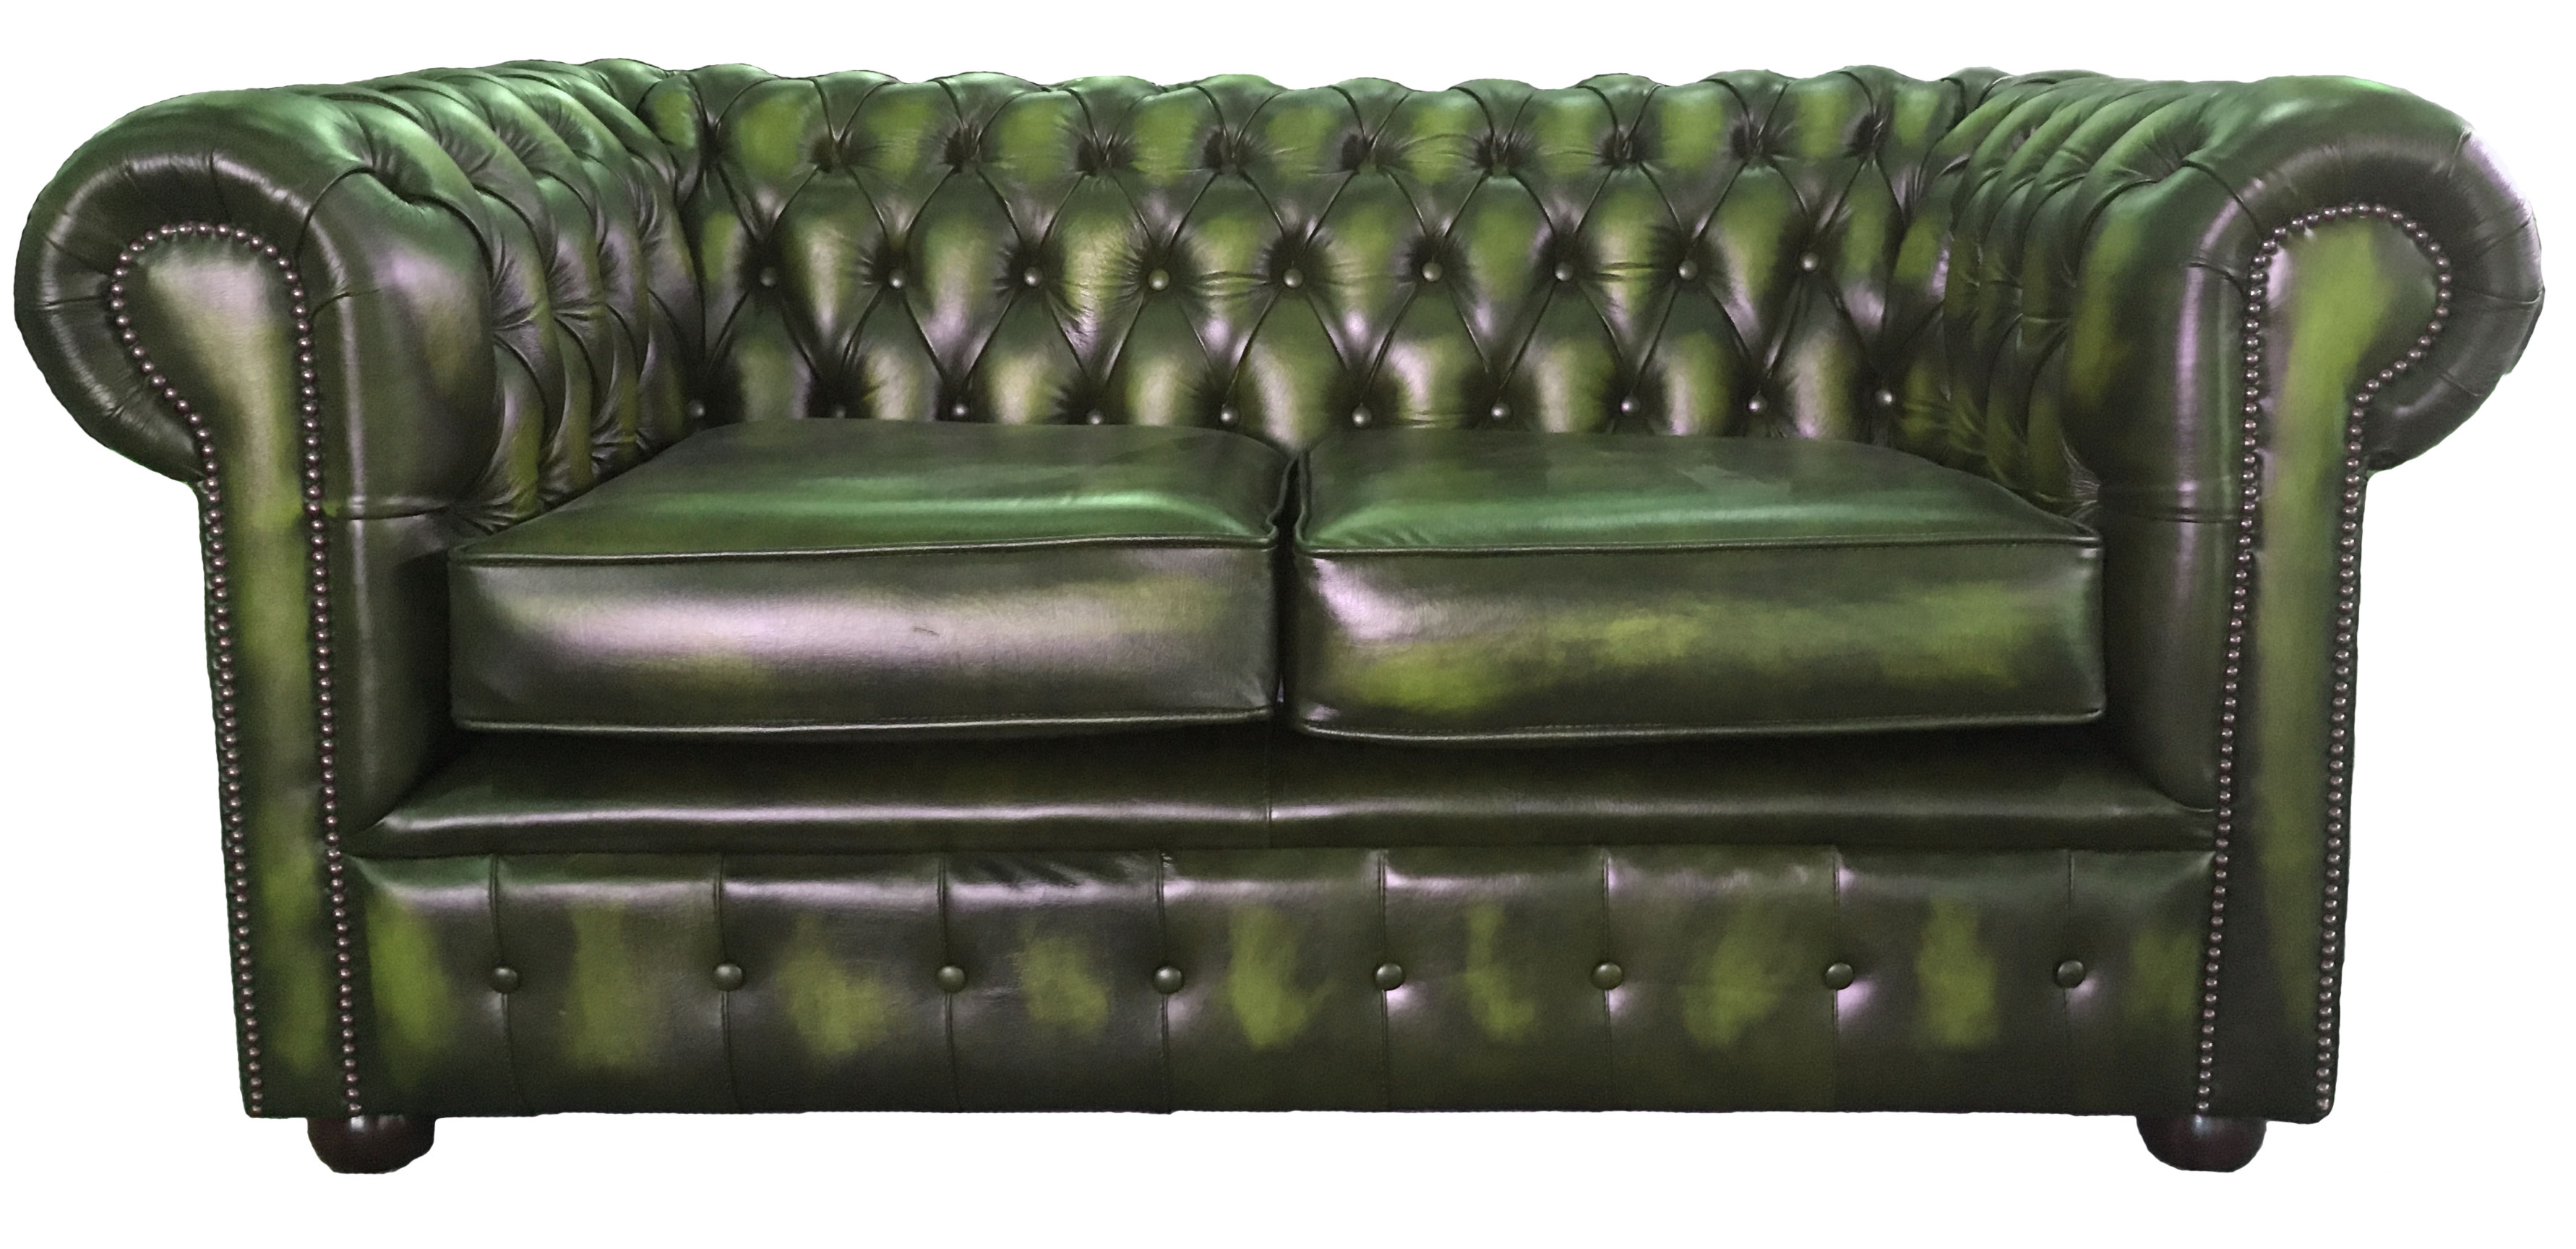 green leather chesterfield sofa bed